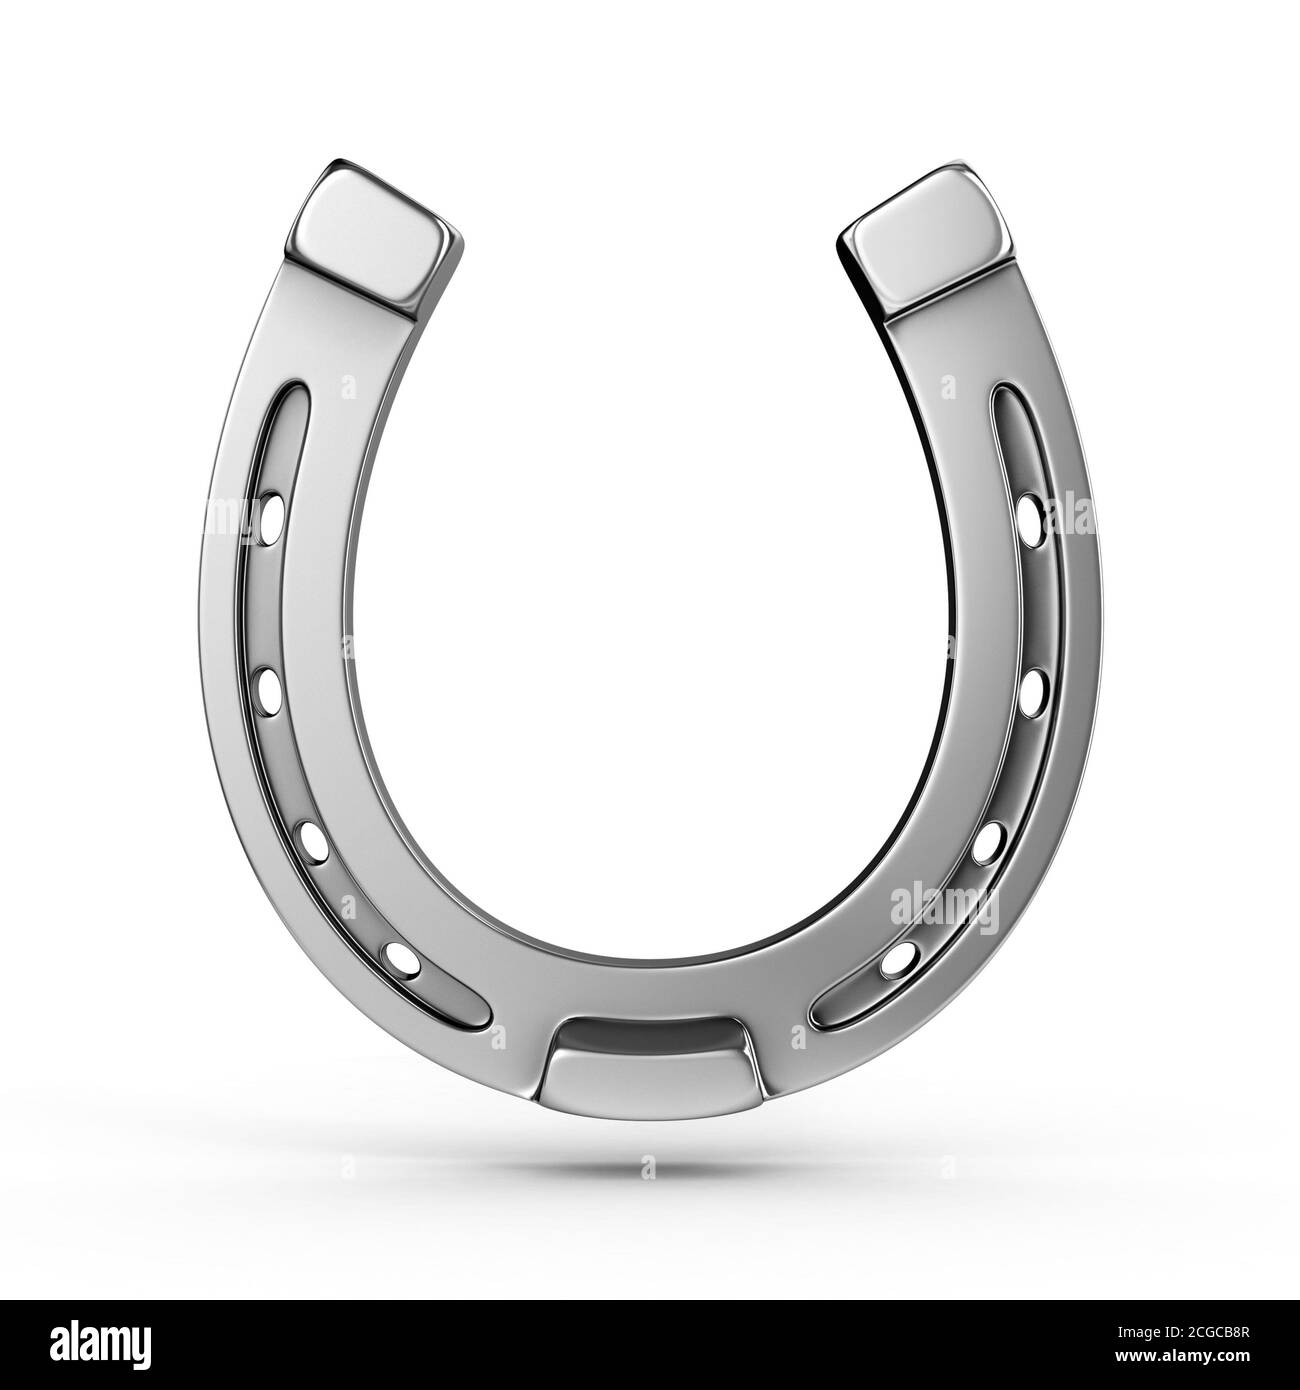 28 Binions Horseshoe Images, Stock Photos, 3D objects, & Vectors